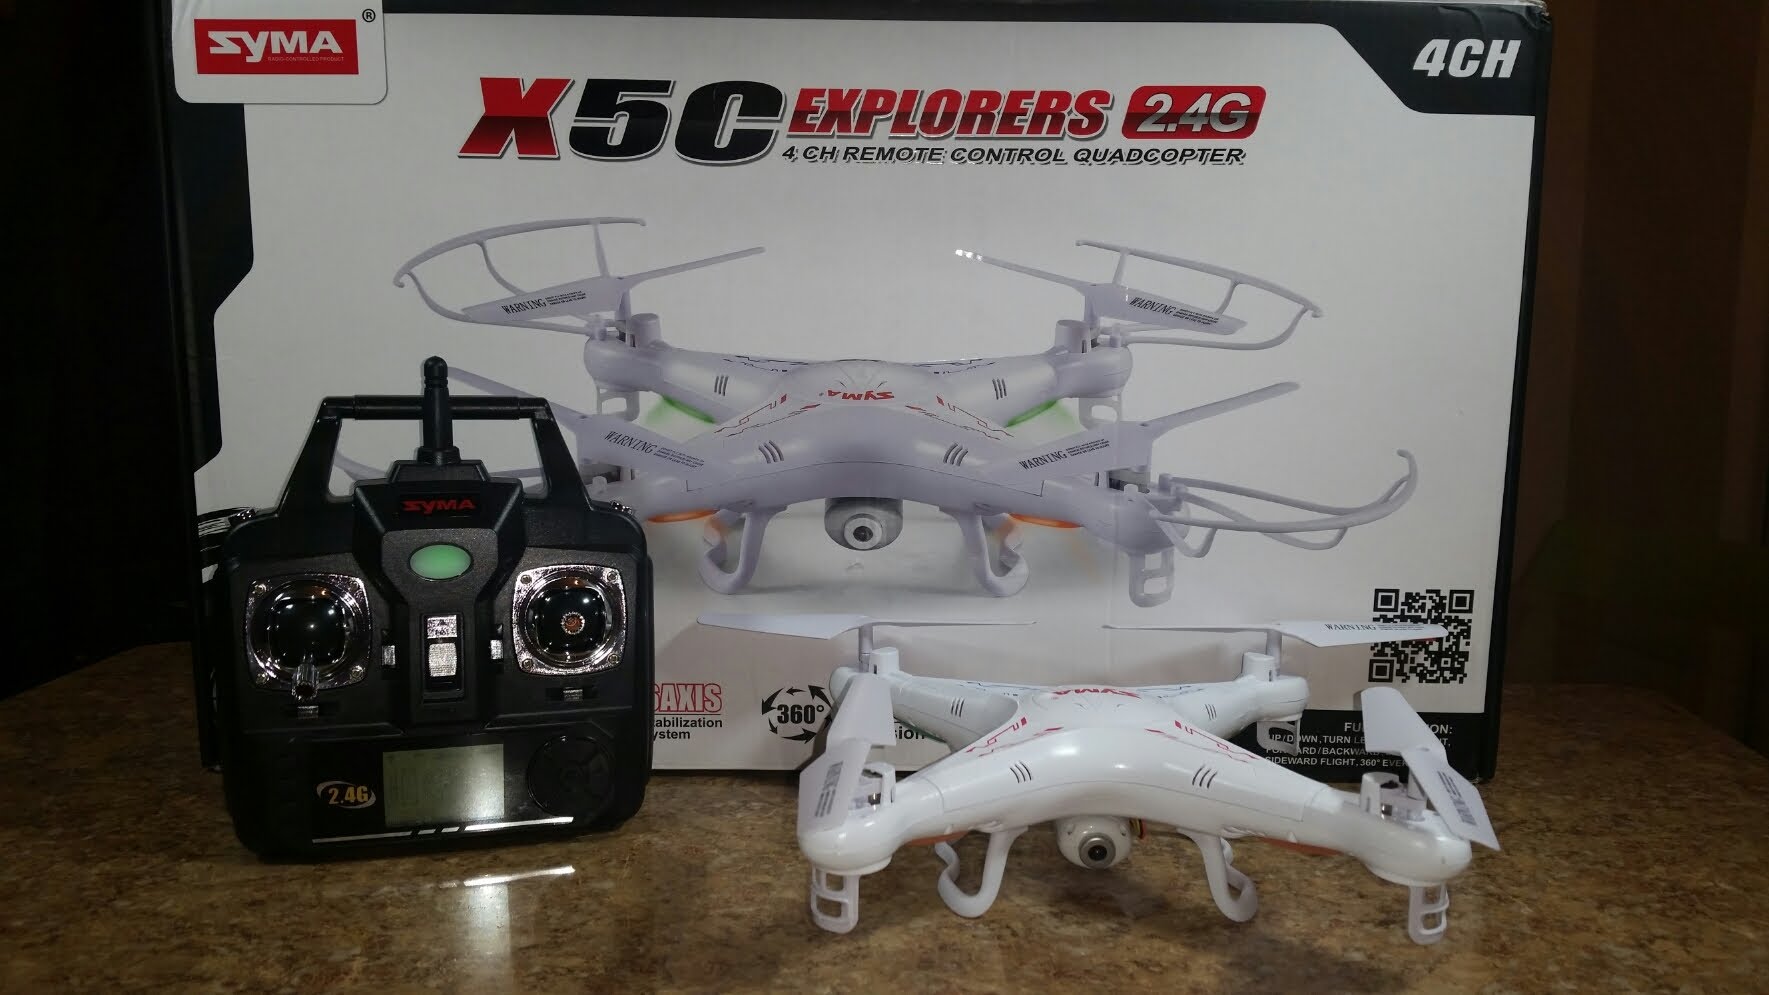 syma x5c explorers drone for beginners